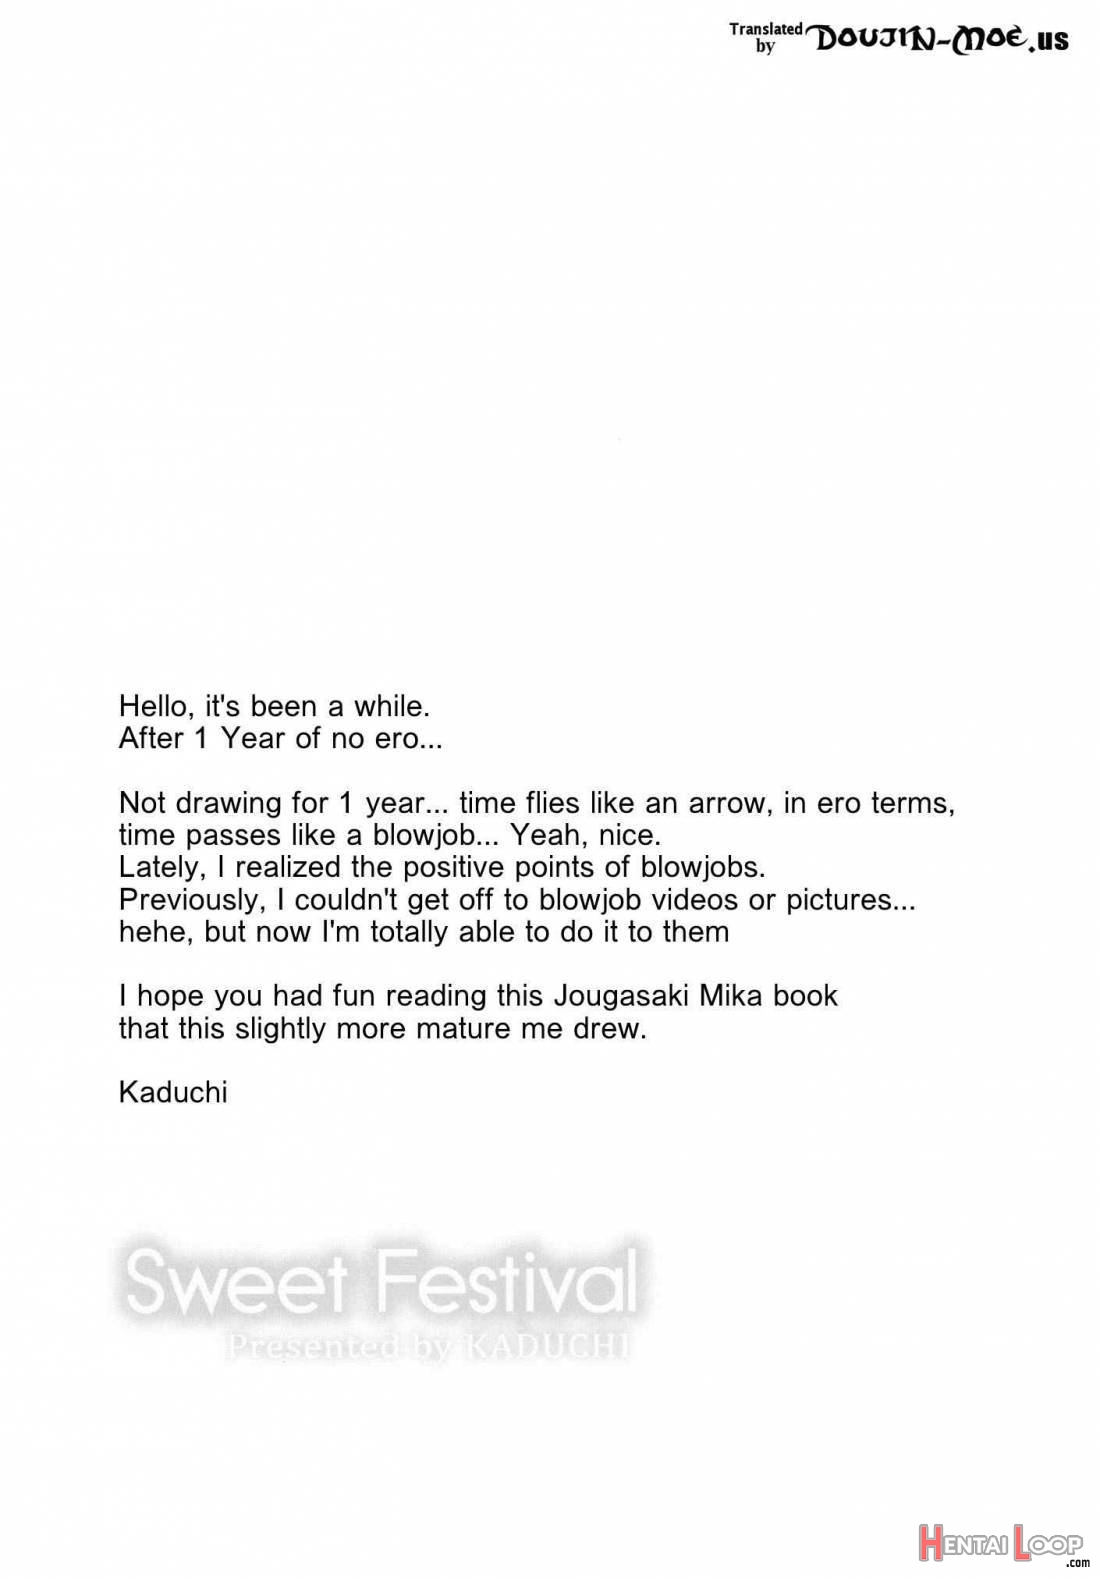 Sweet Festival page 2